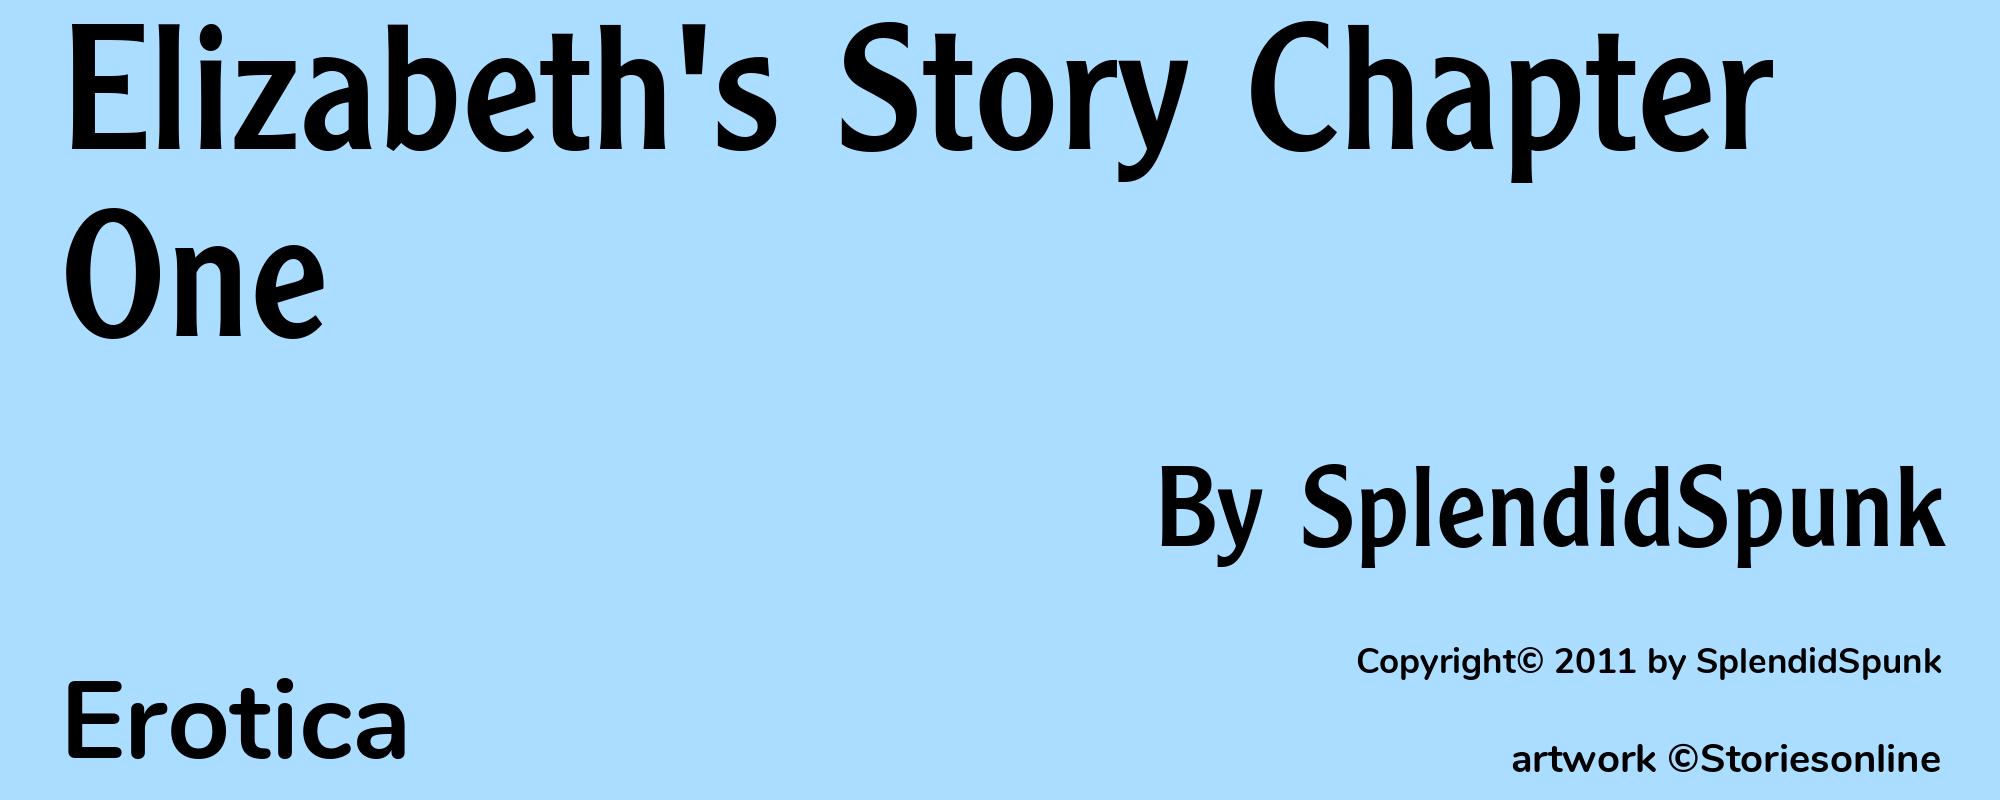 Elizabeth's Story Chapter One - Cover